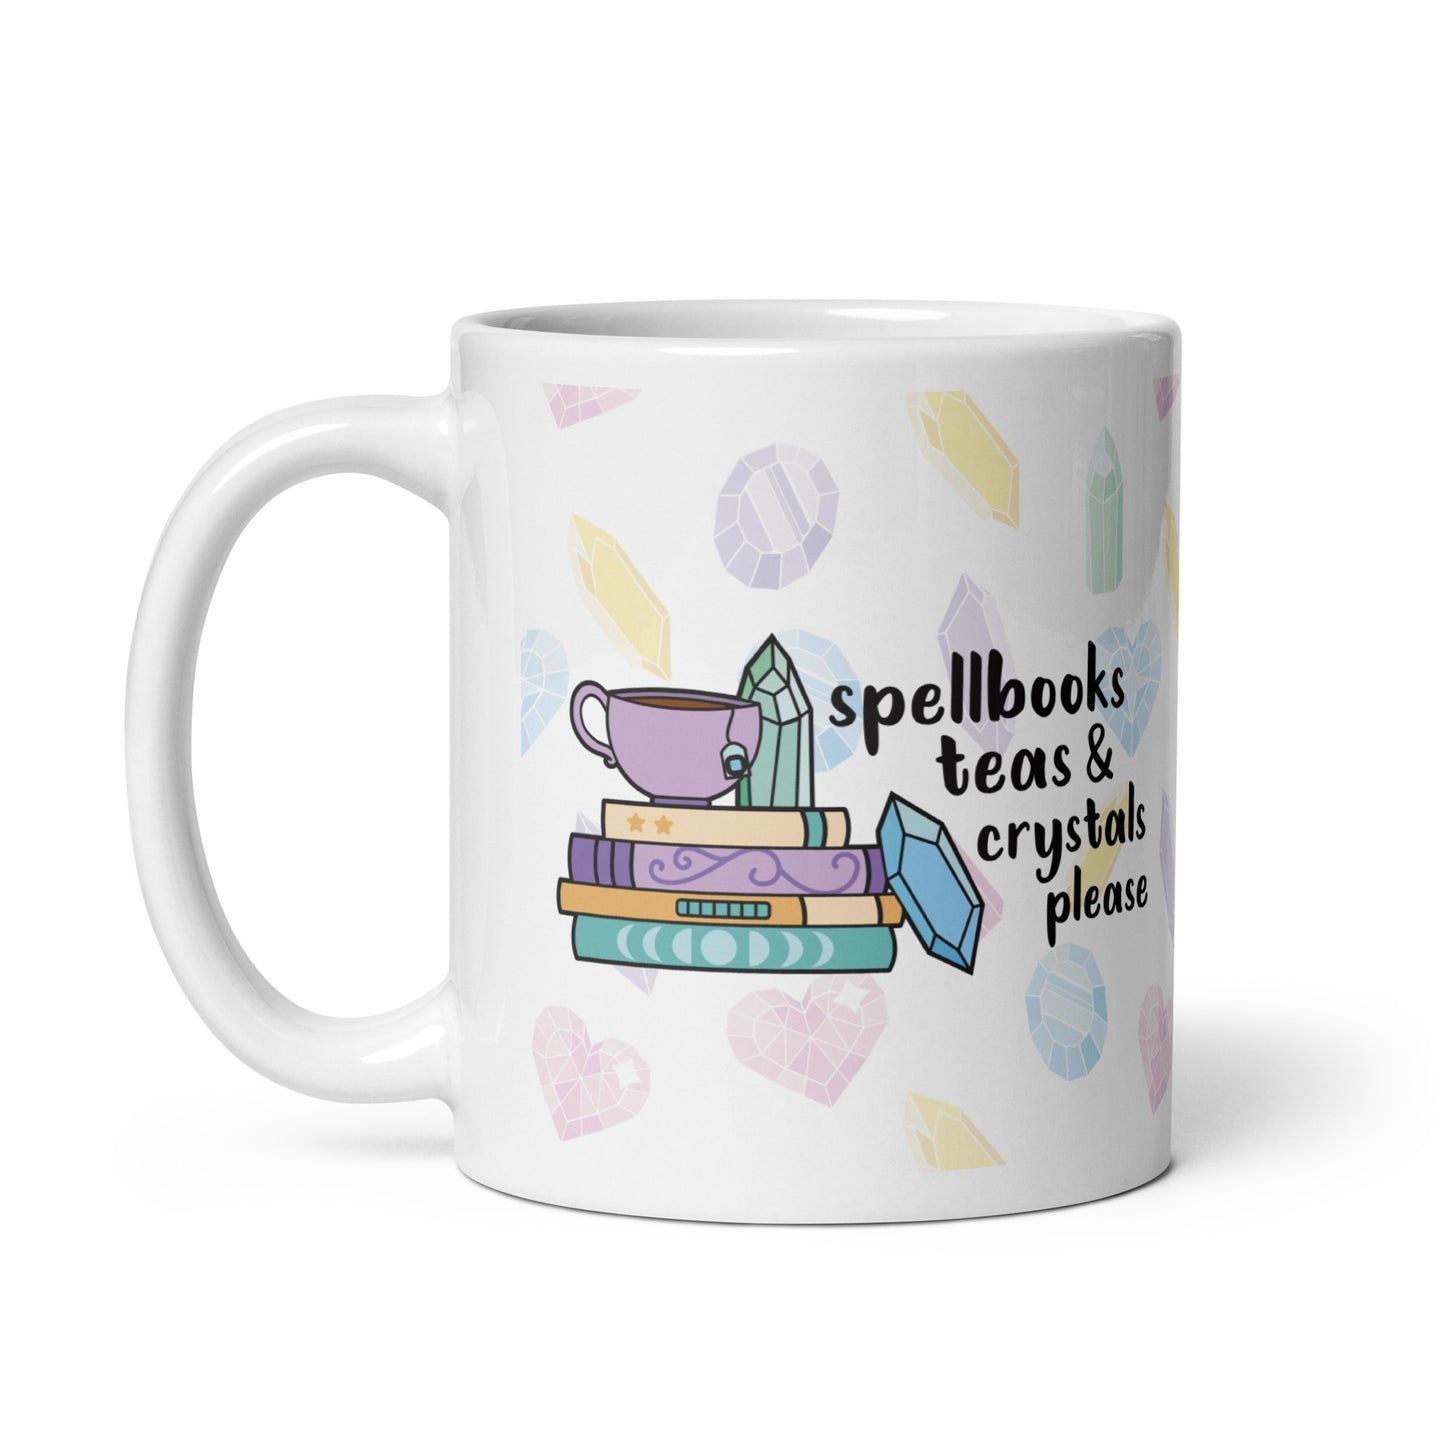 A white 11 ounce ceramic mug with a pattern of pastel crystals. In the center of the mug is an illustration of several books and crystals and a teacup. Text along side the image reads "Spellbooks, teas, & crystals please"